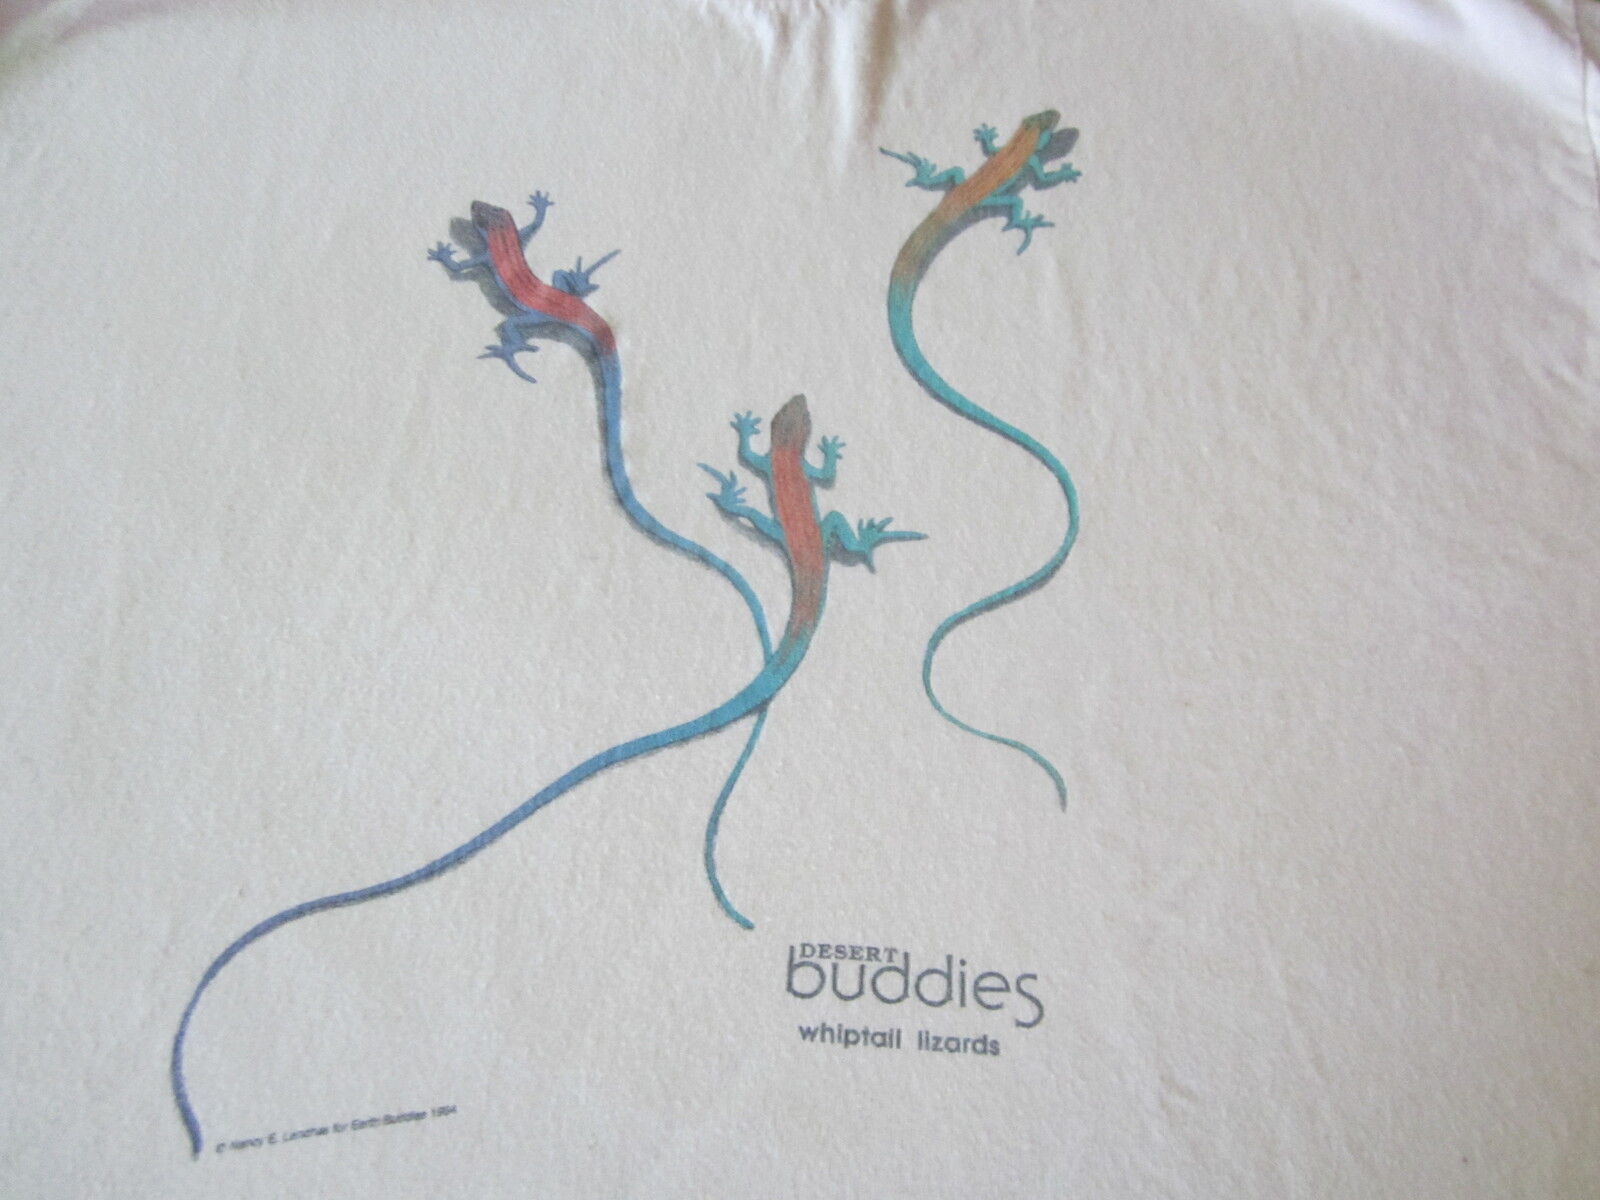 VINTAGE WHIPTAIL LIZARDS Now free shipping Max 75% OFF TEE NICE XL SHIRT